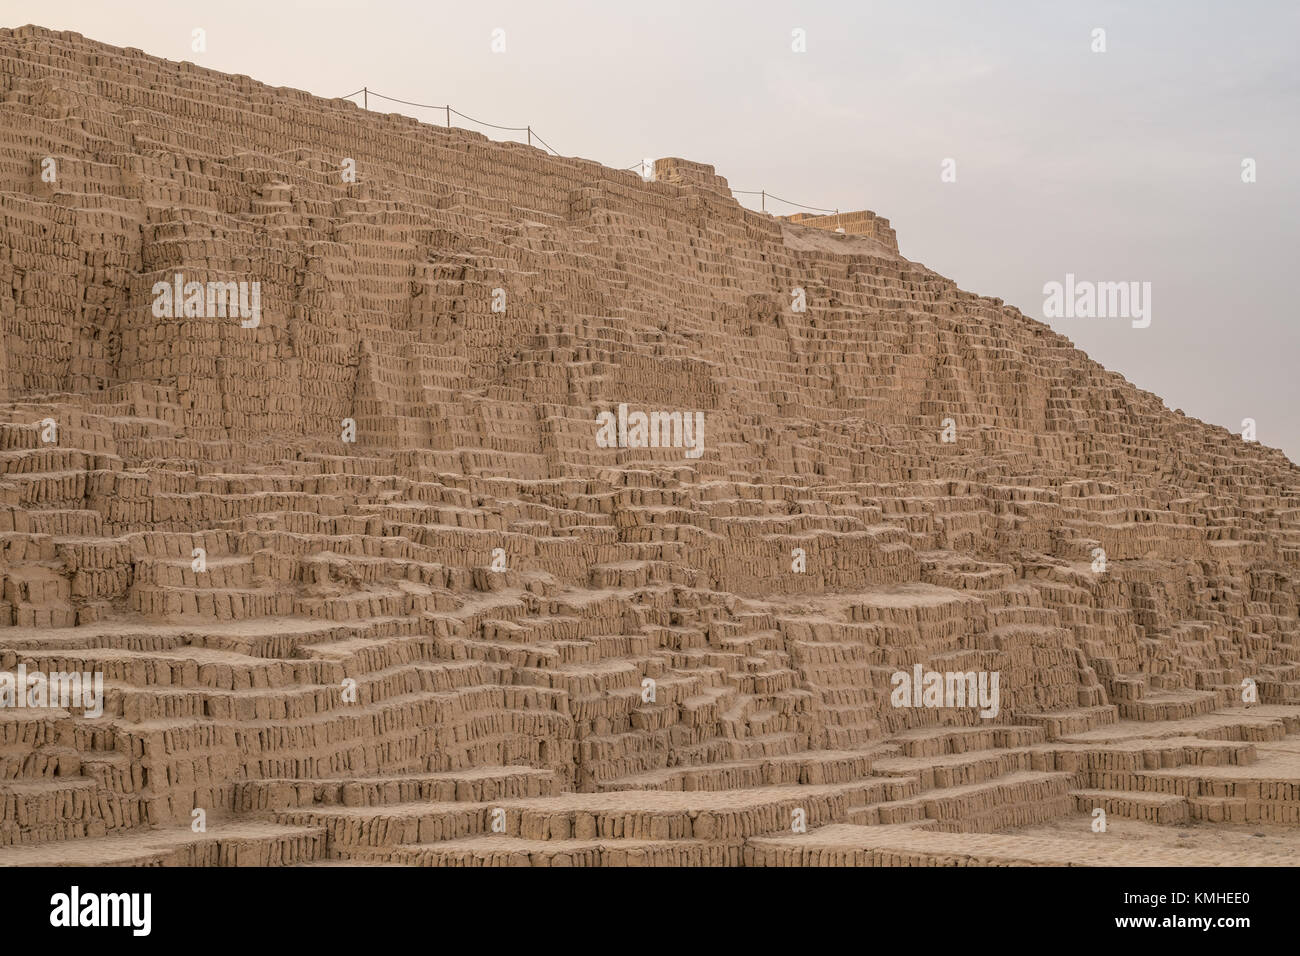 Huaca Pucllana or Huaca Juliana, a huge adobe and clay pyramid in the Miraflores district of central Lima, Peru, South America, built around 500 A.D. Stock Photo